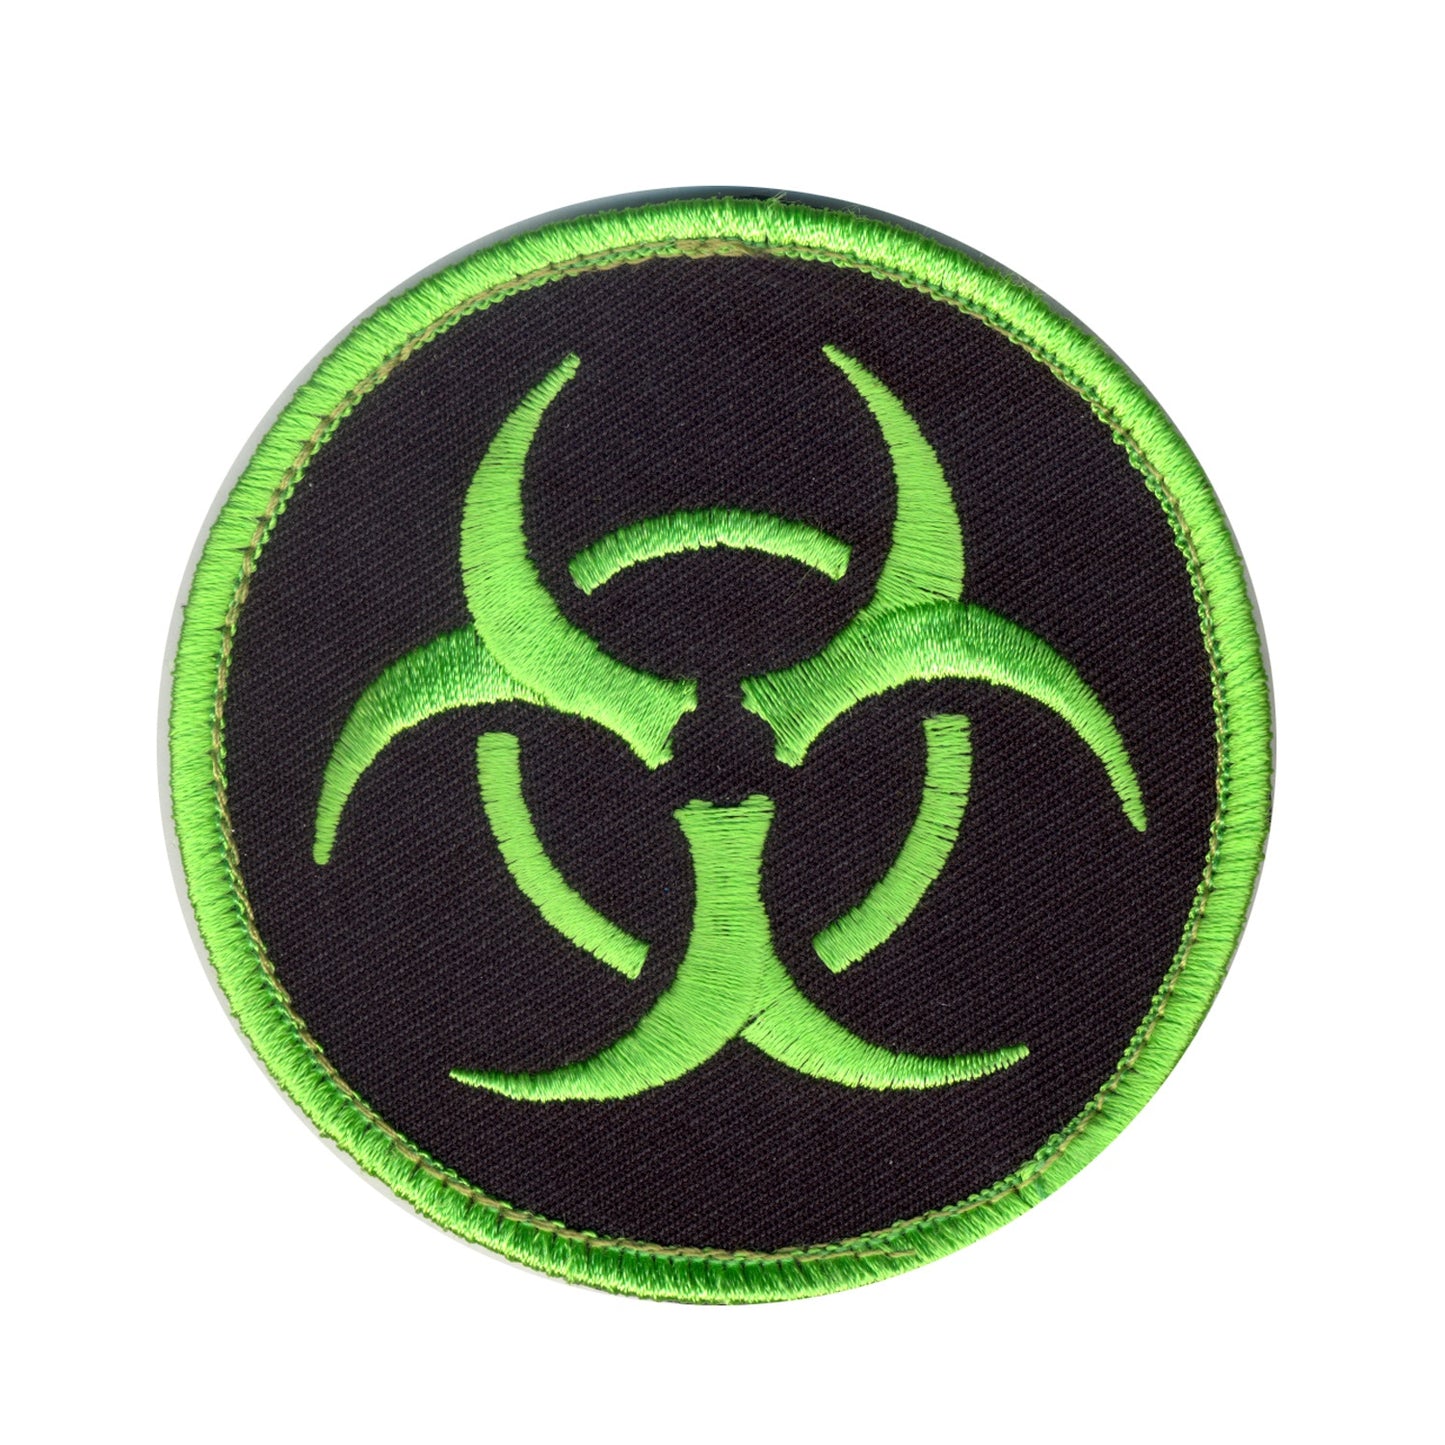 Tactical Morale Patch - Rothco Velcro-Type Hook Back Patches